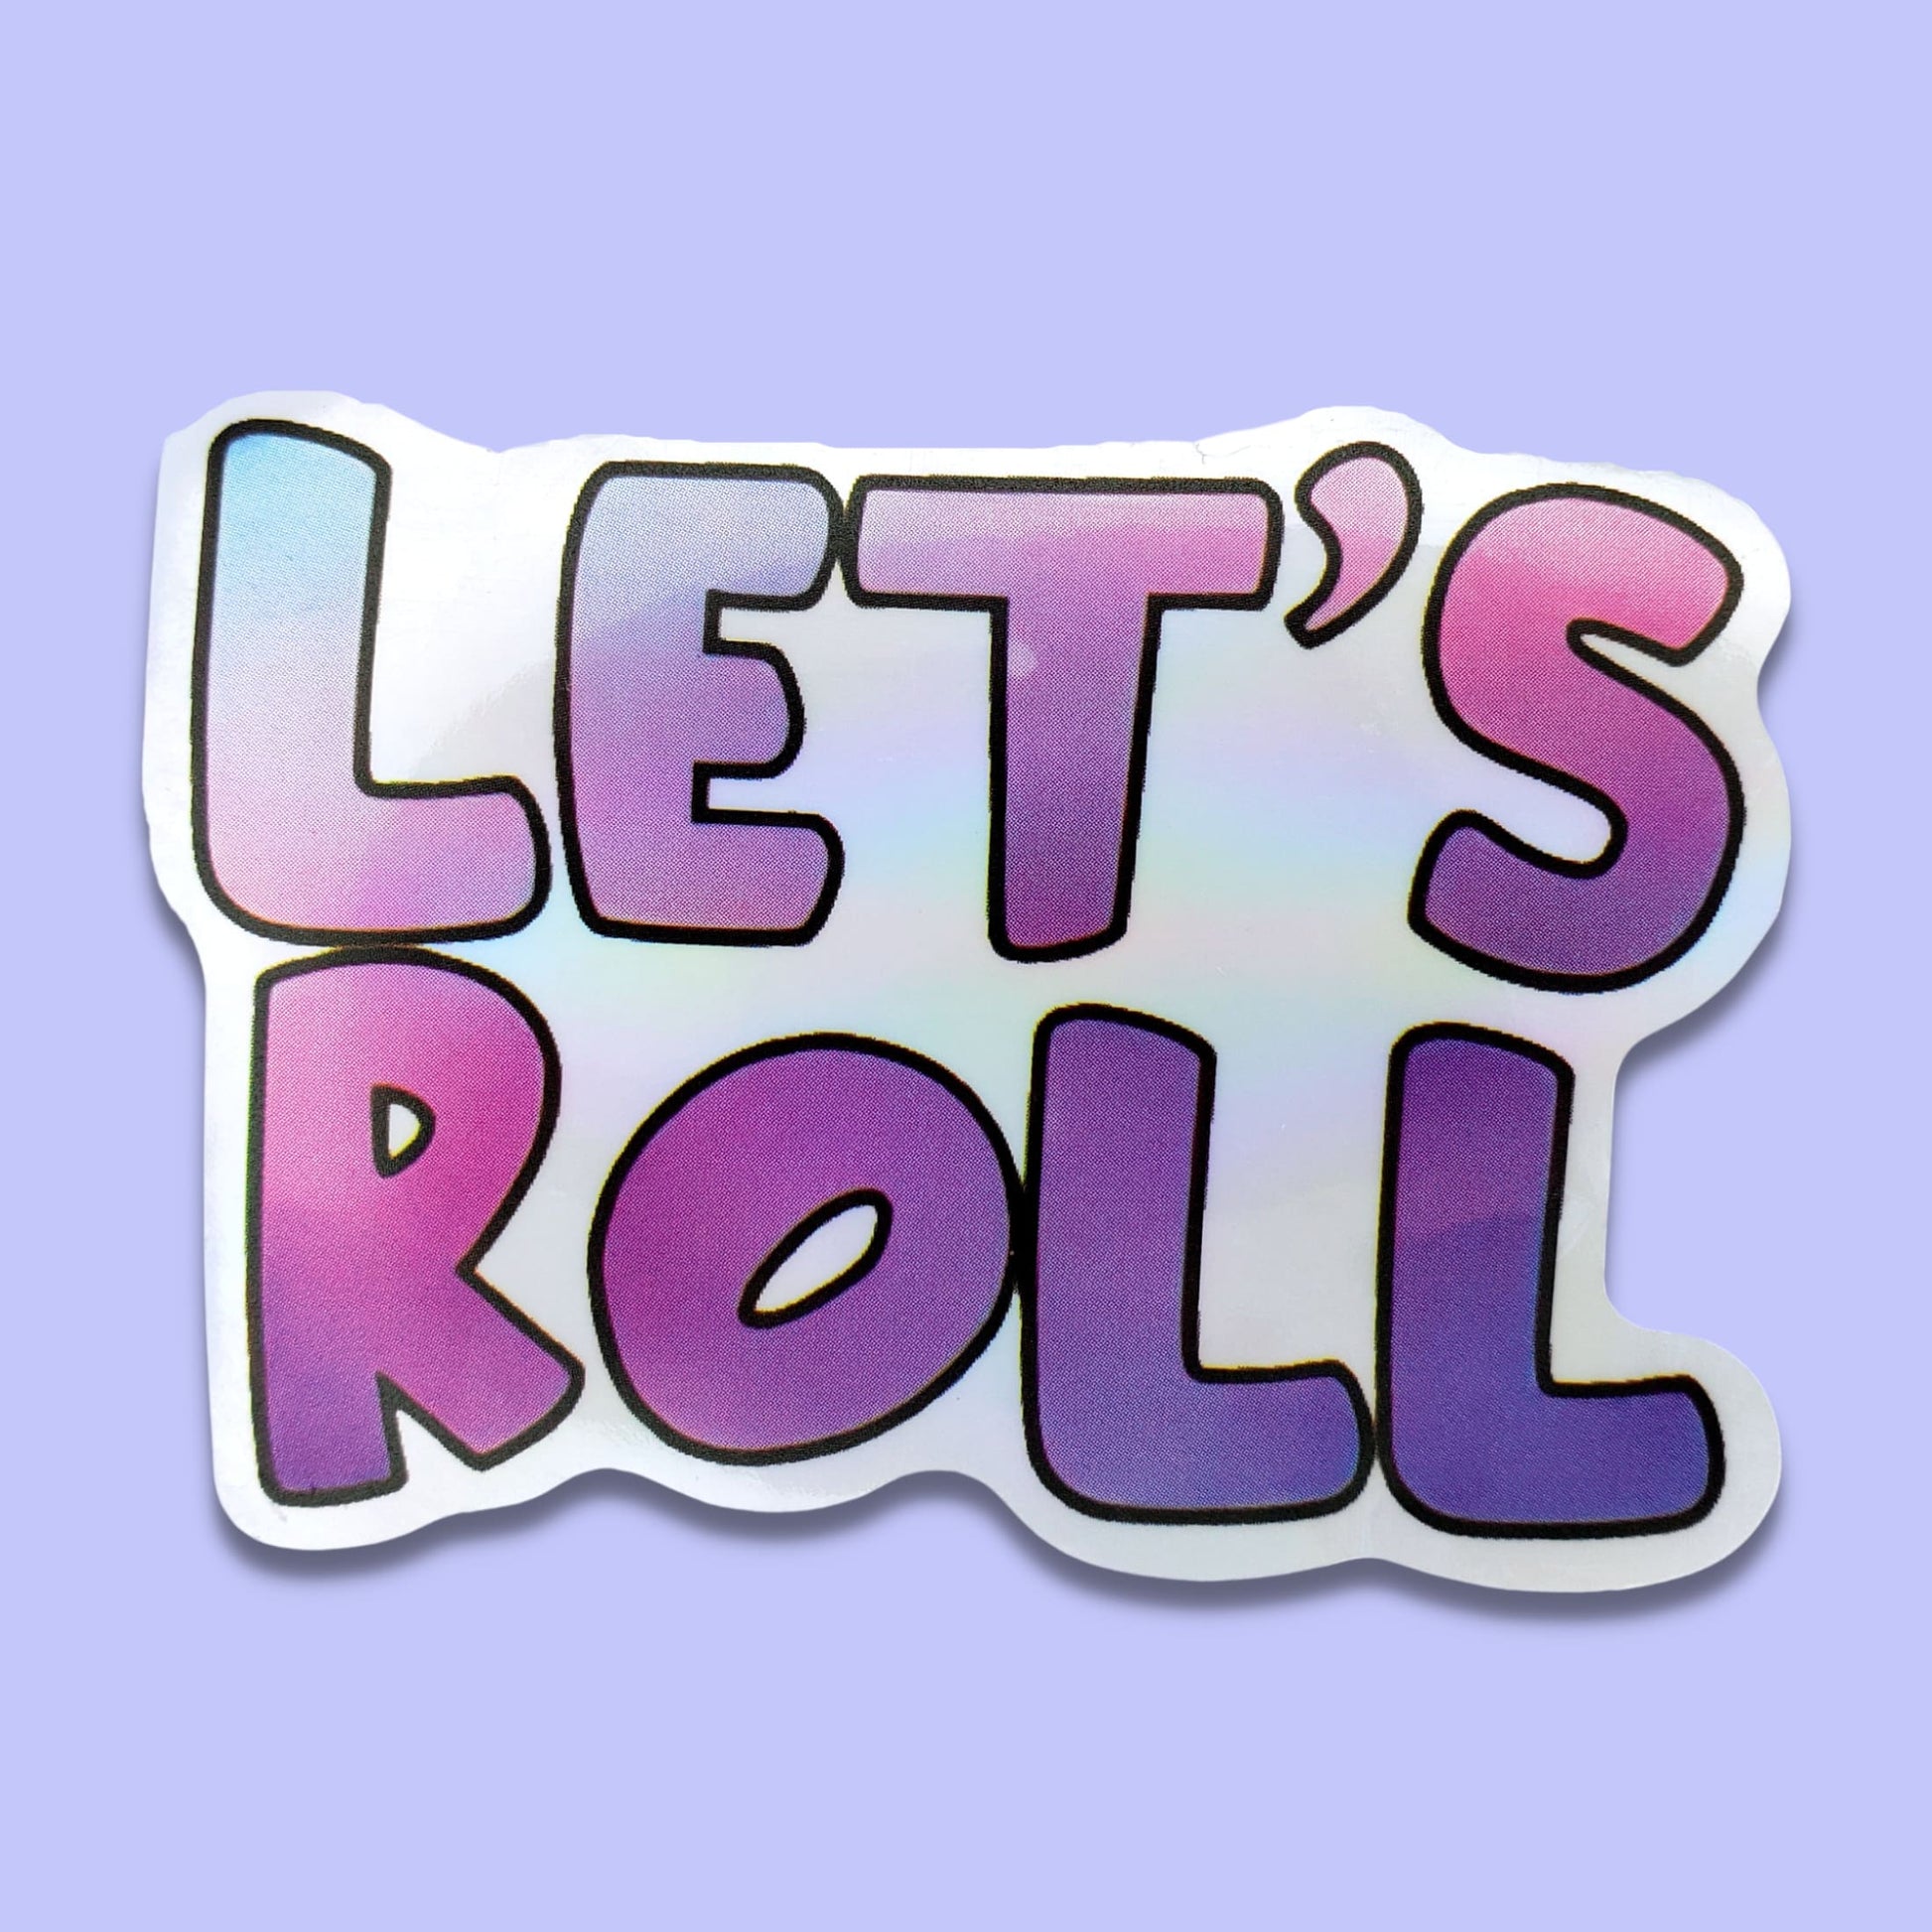 Let's Roll Waterproof Holographic Sticker from Confetti Kitty, Only 1